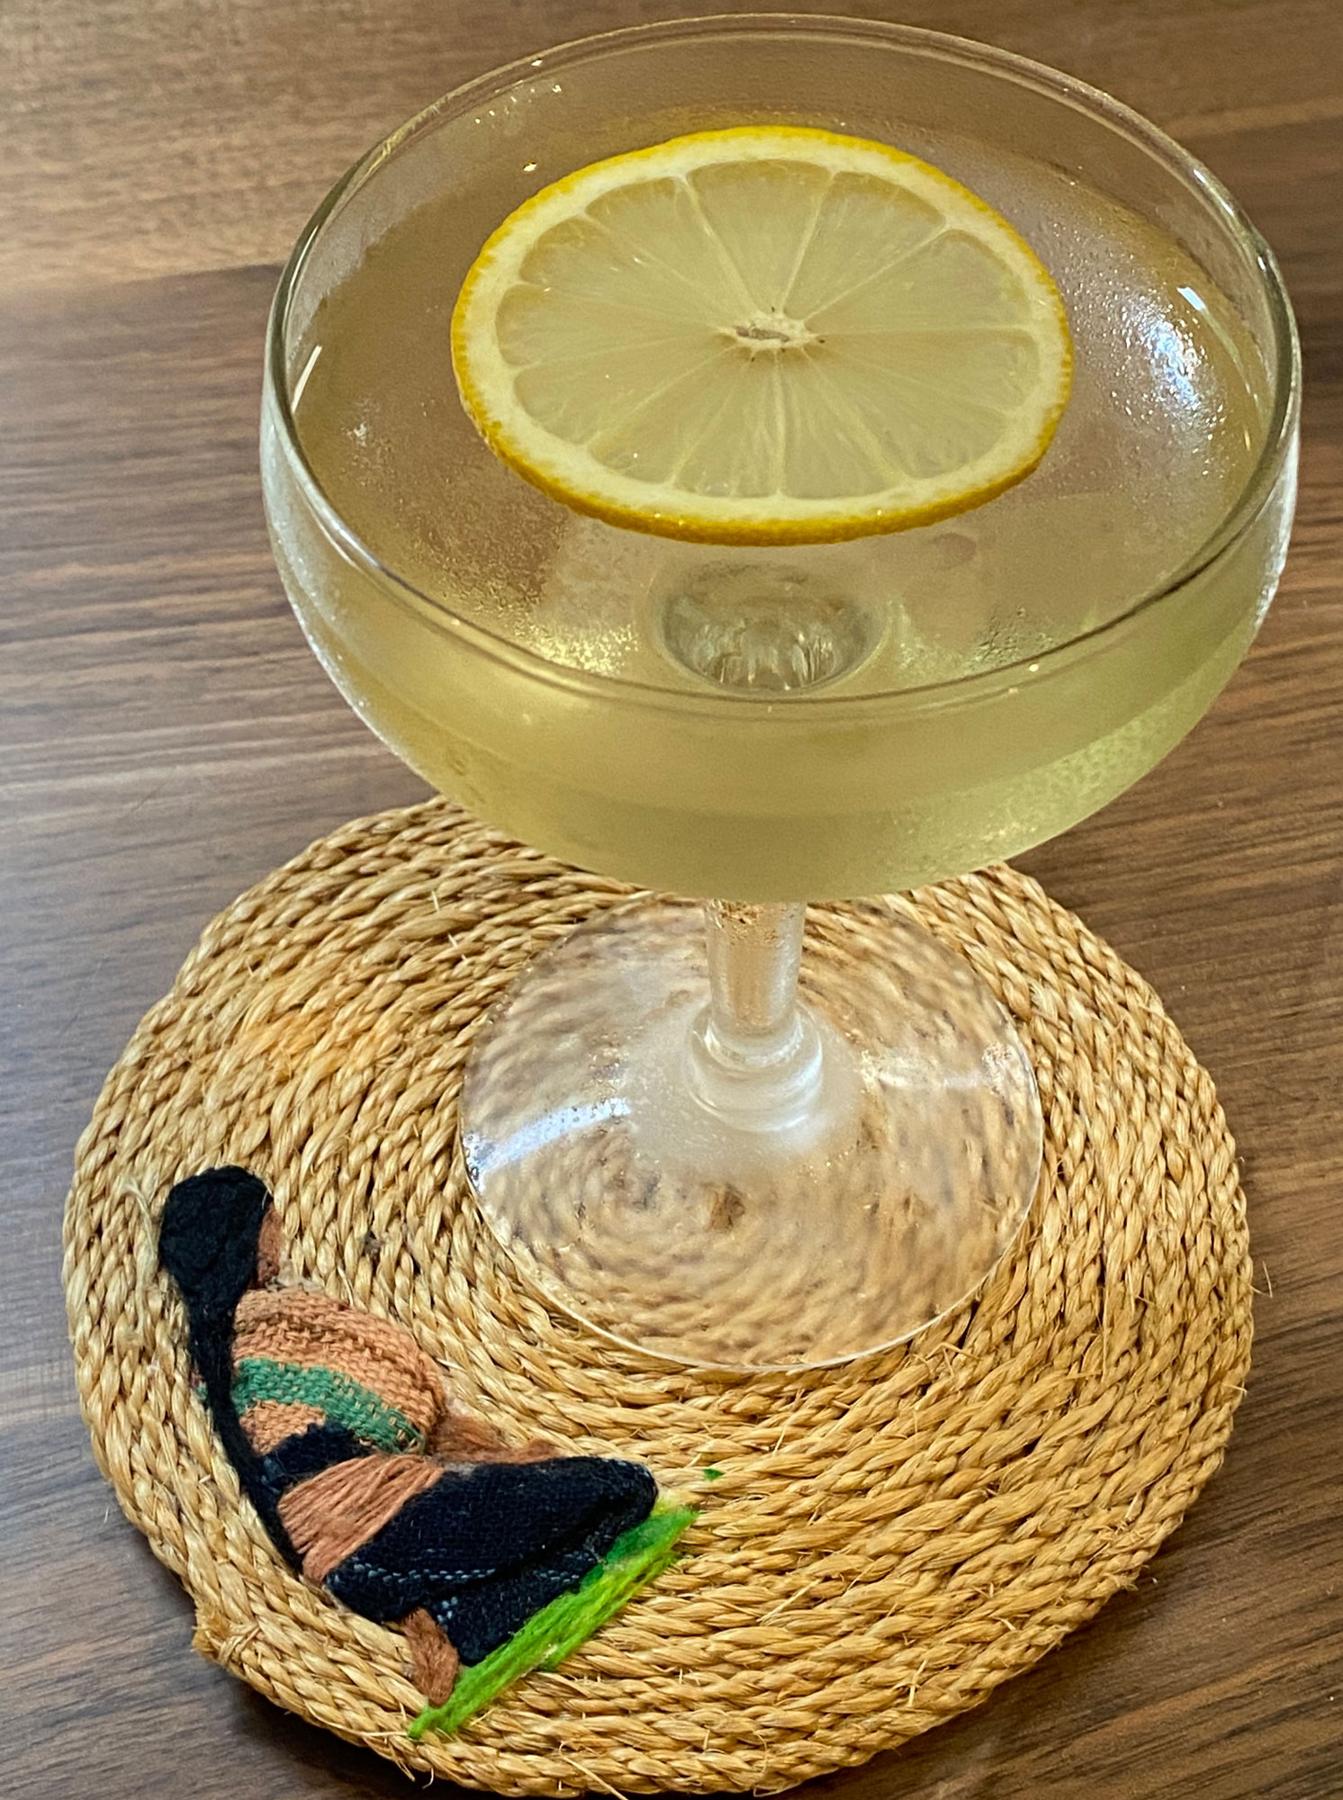 An example of the Adelita, the mixed drink (drink), by Carrie Cole, Hawthorne Bar, Boston, featuring reposado tequila, Dolin Blanc Vermouth de Chambéry, Cocchi Americano Bianco, Rothman & Winter Crème de Violette, and lemon wheel; photo by Martin Doudoroff